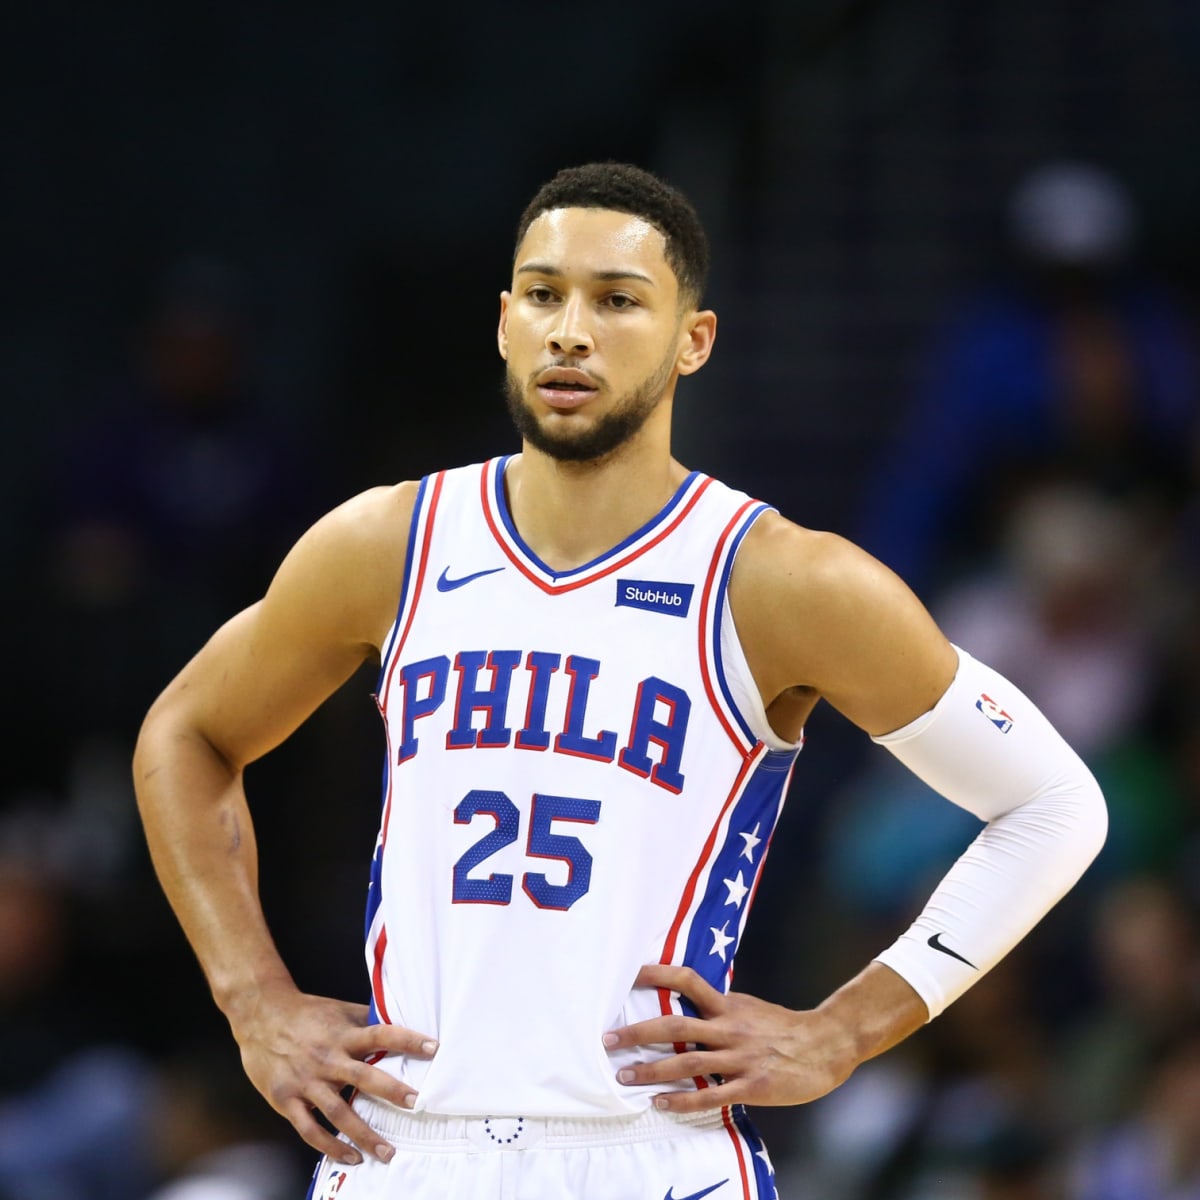 The Sixers' Alternate Uniforms are Beautiful (Despite Exhausted